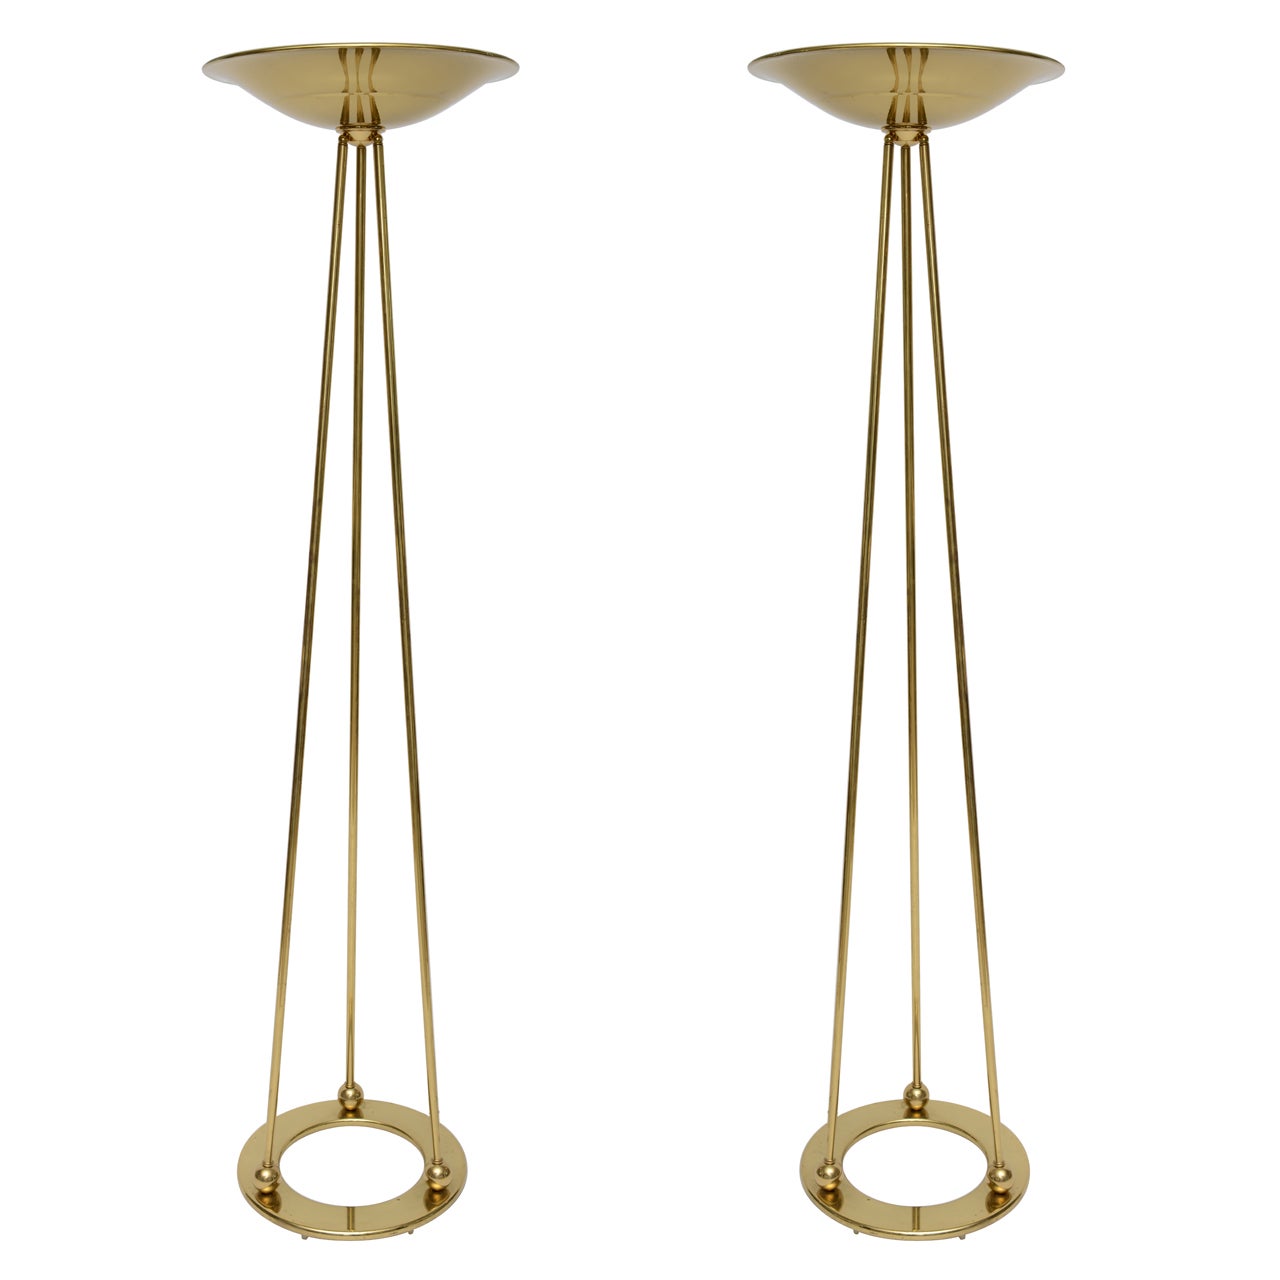 Pair Of Casella  Brass Torchieres , Floor Lamps